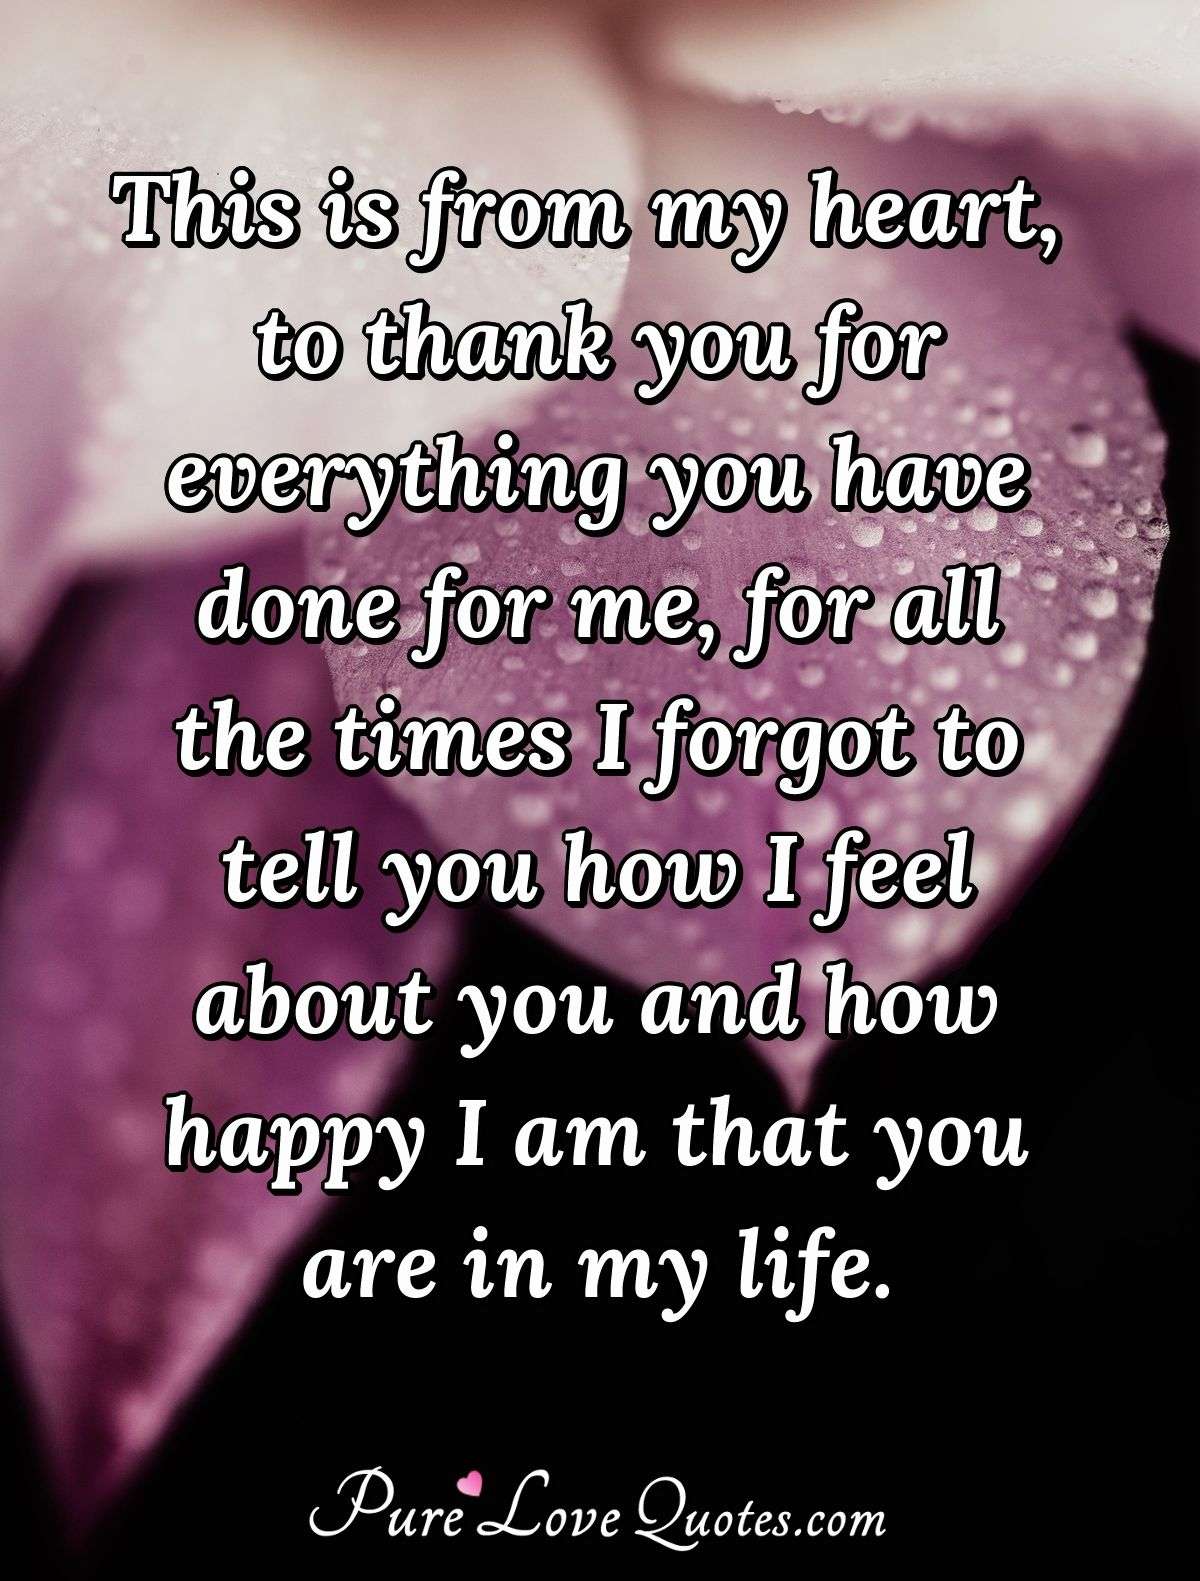 This Is From My Heart To Thank You For Everything You Have Done For Me For Purelovequotes